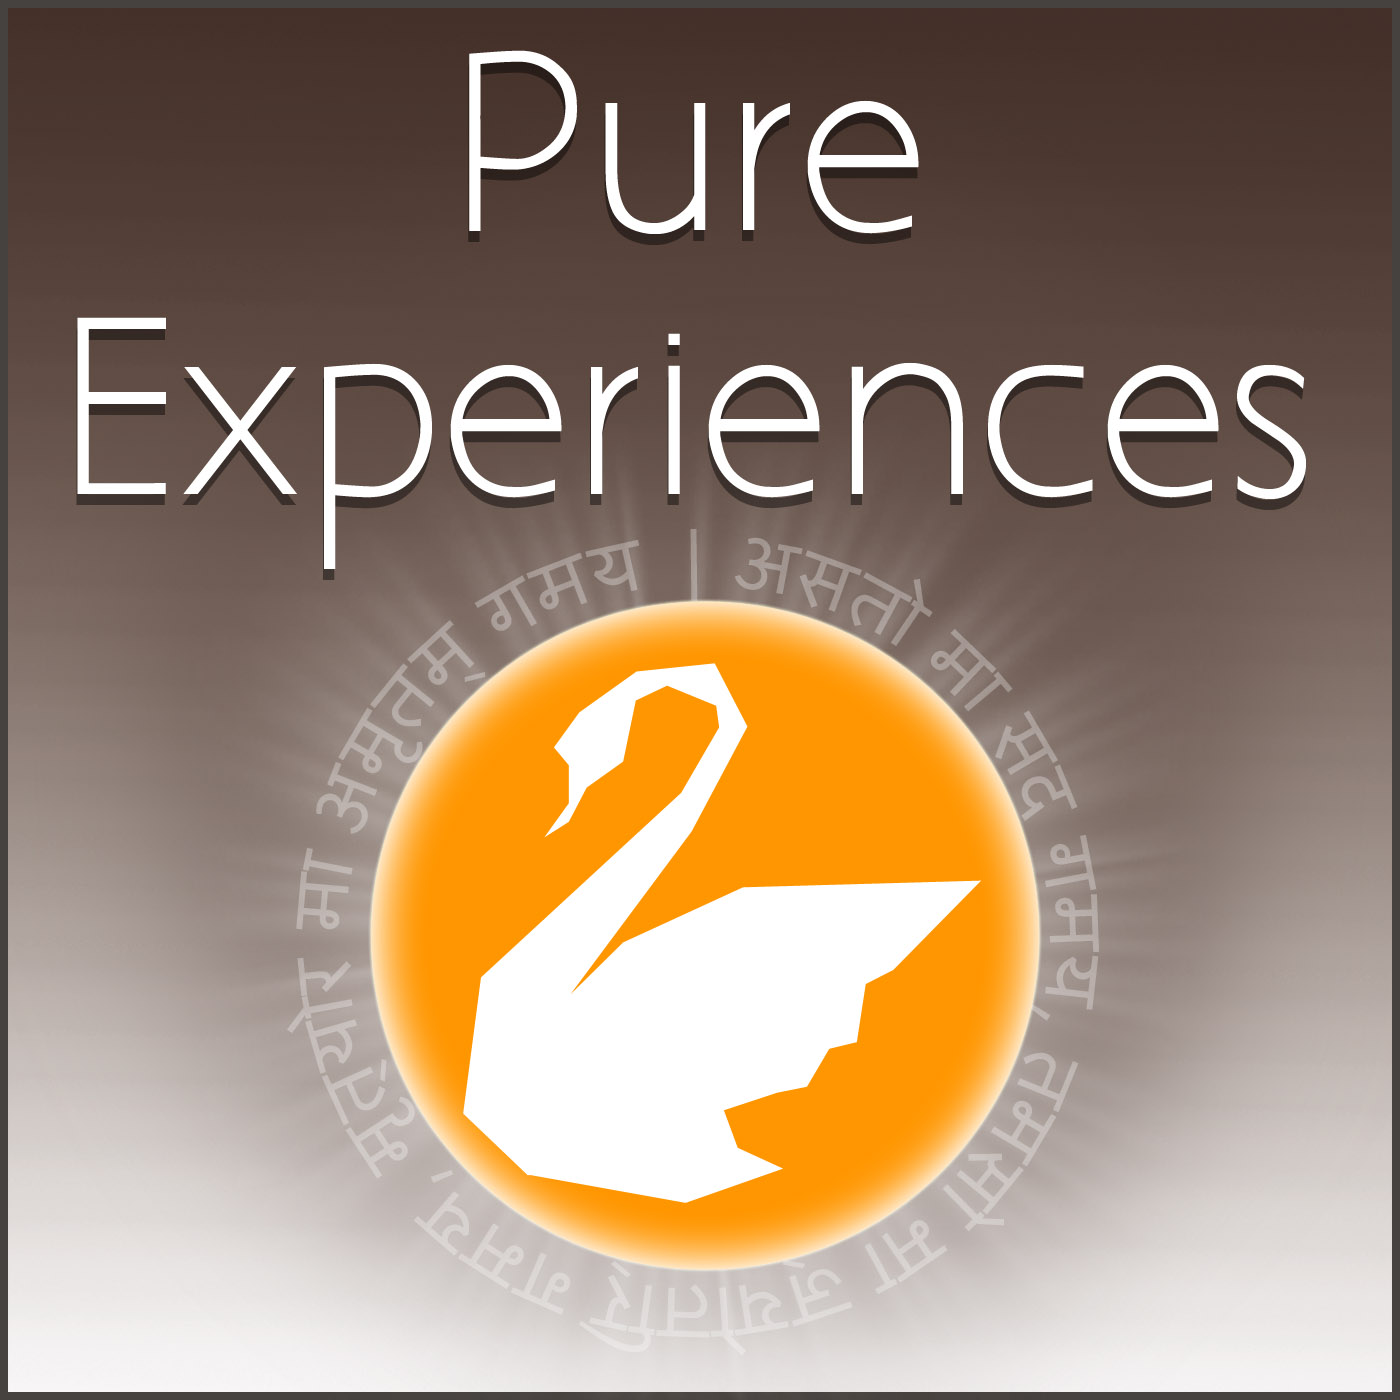 Pure Experiences